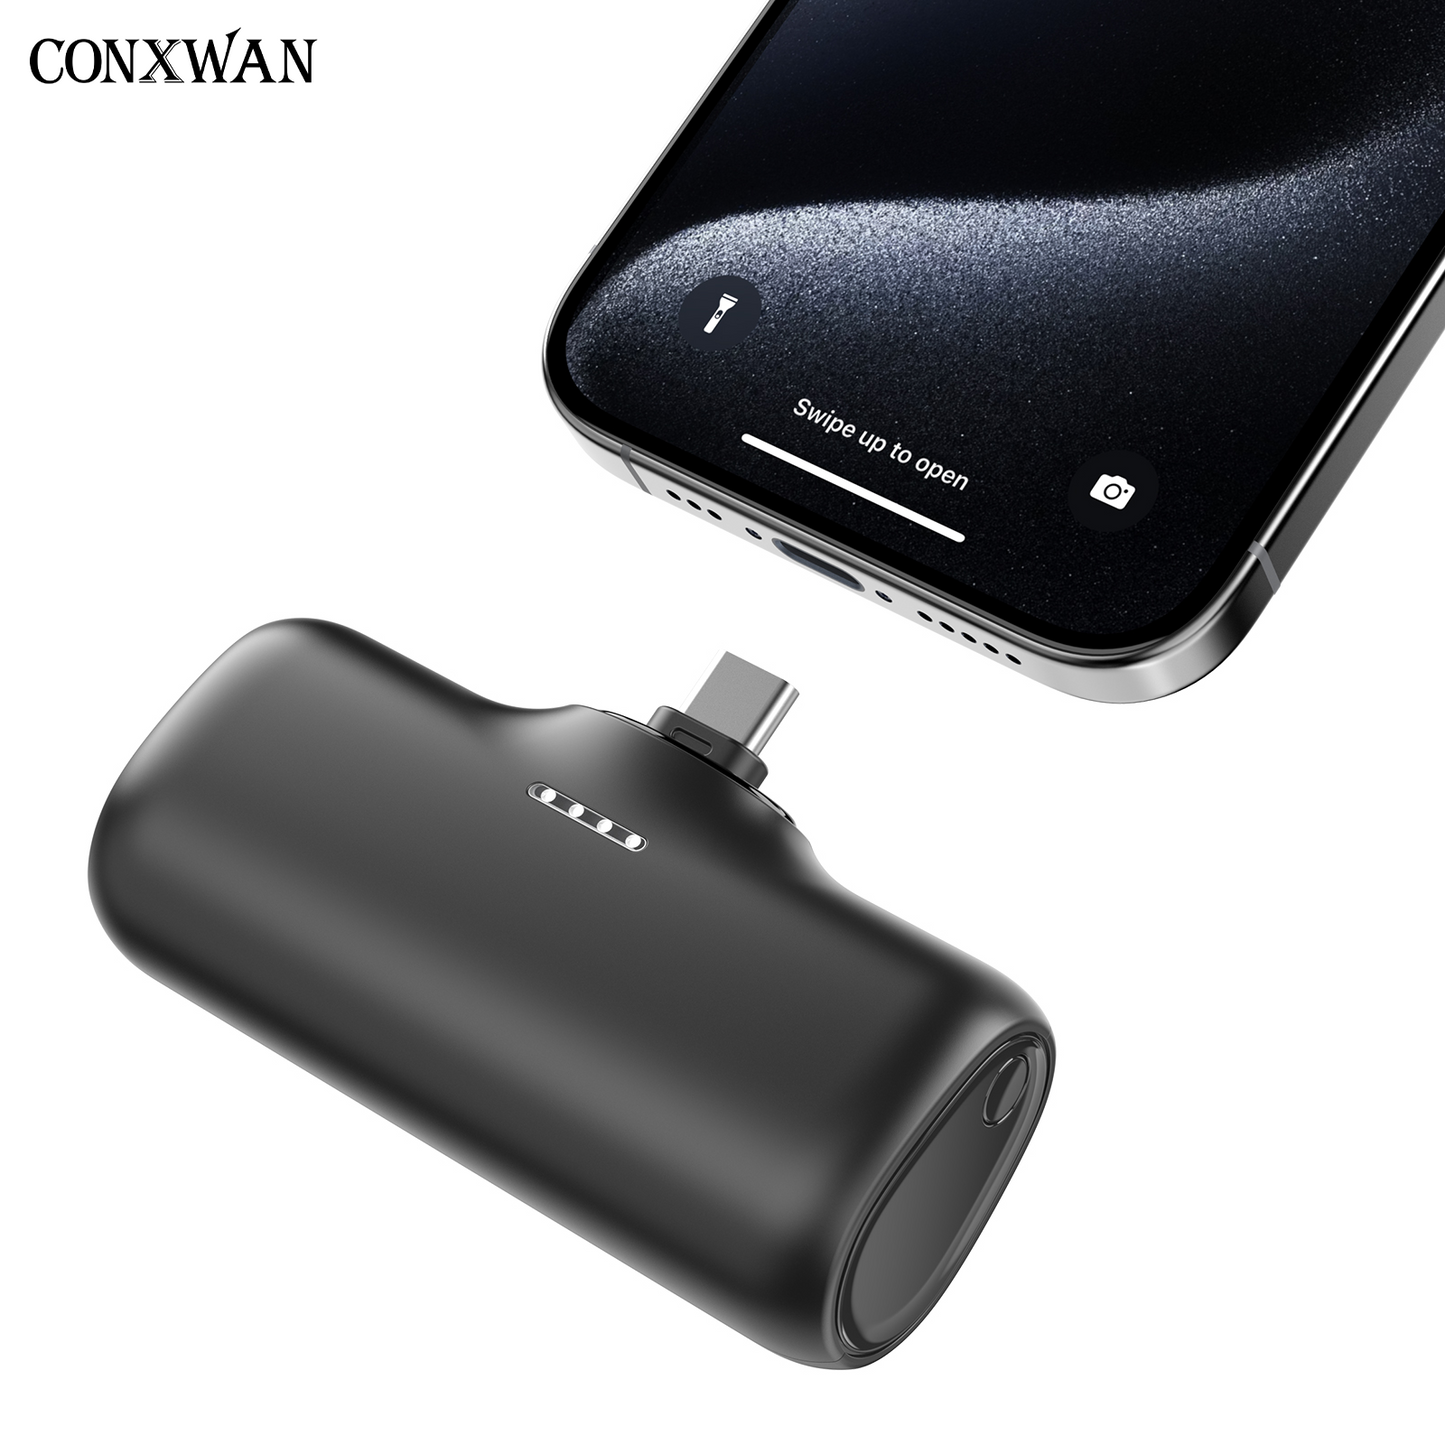 CONXWAN Small Portable Charger 5000mAh